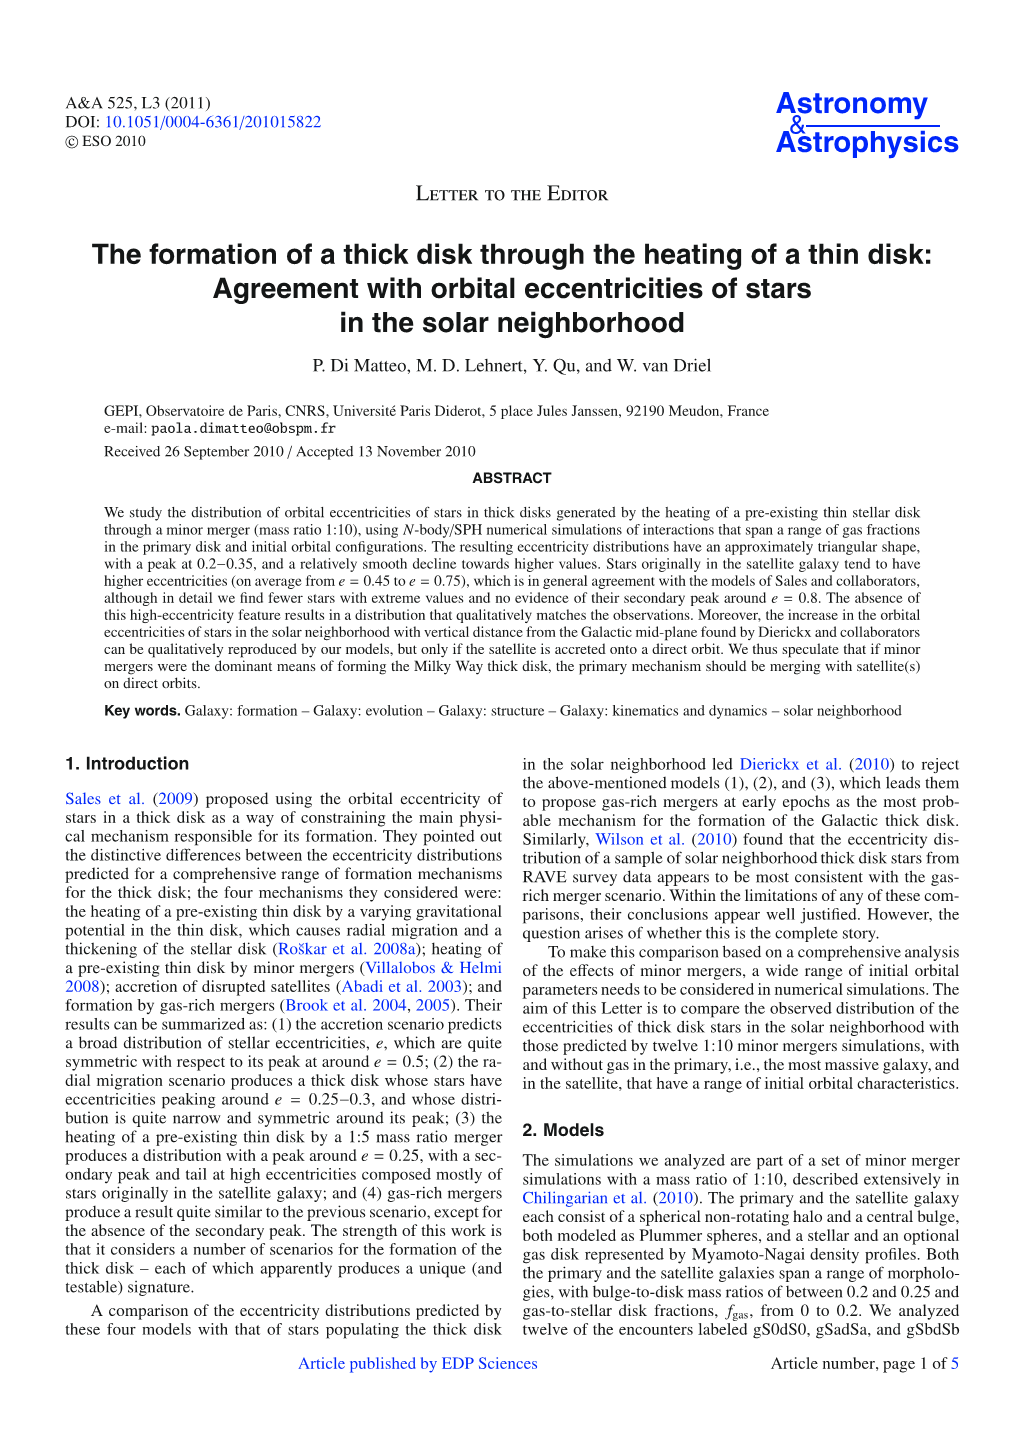 The Formation of a Thick Disk Through the Heating of a Thin Disk: Agreement with Orbital Eccentricities of Stars in the Solar Neighborhood